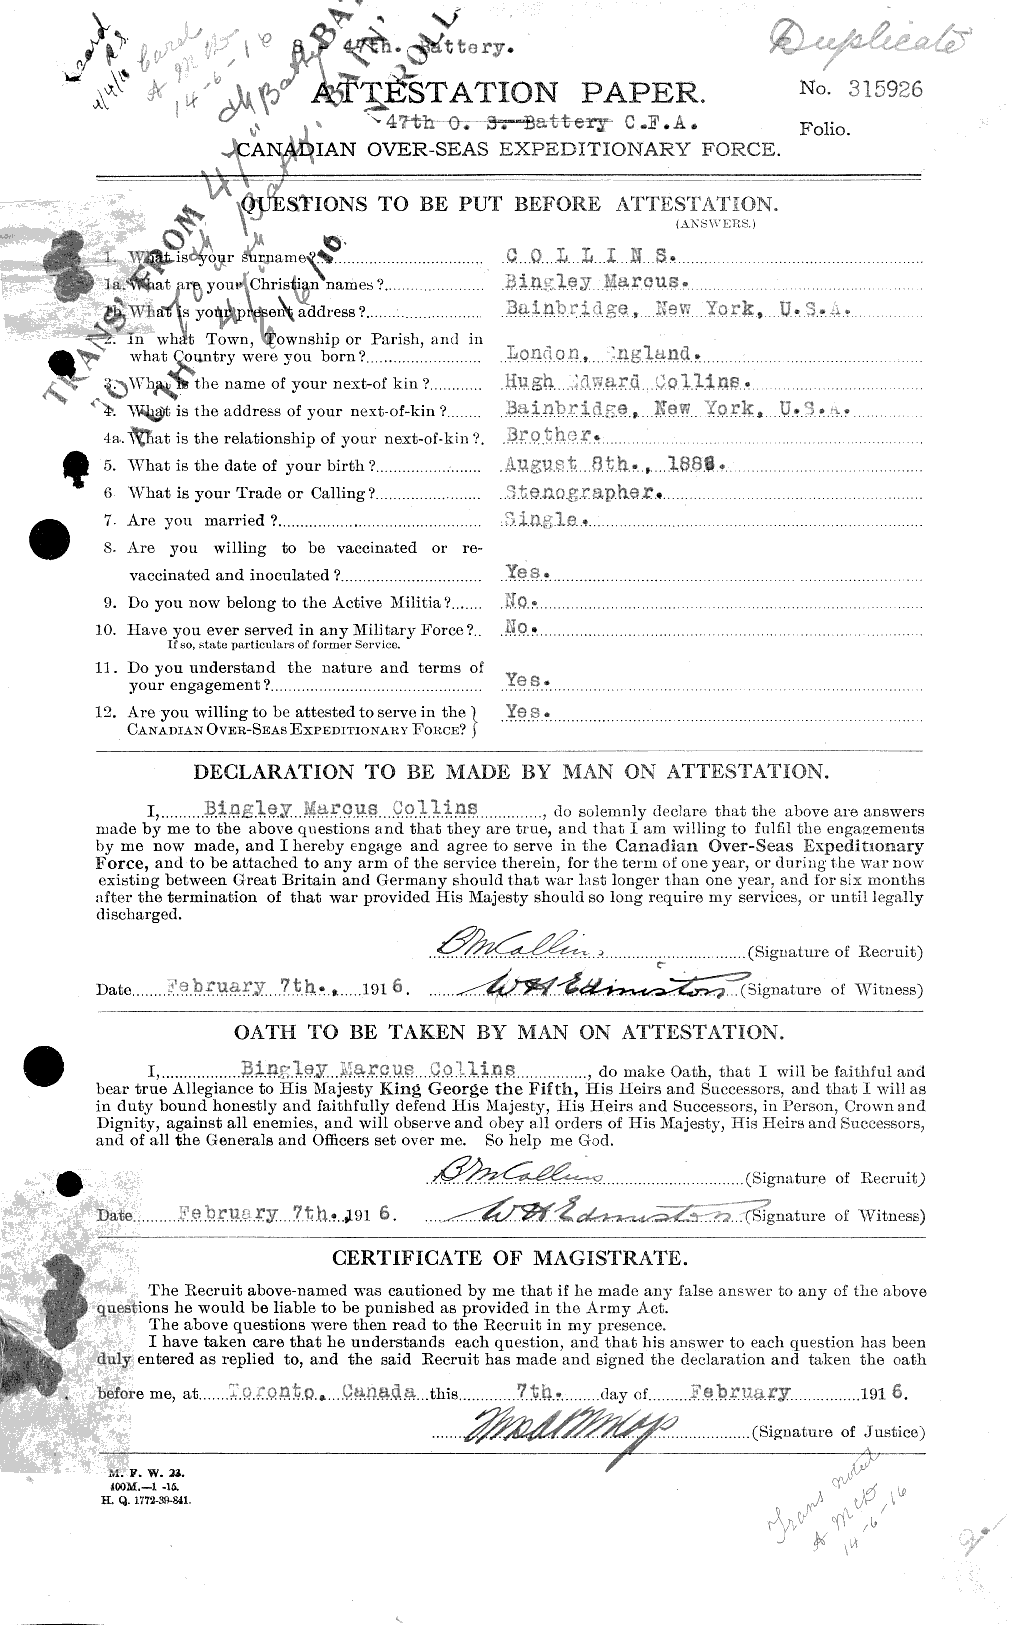 Personnel Records of the First World War - CEF 028997a